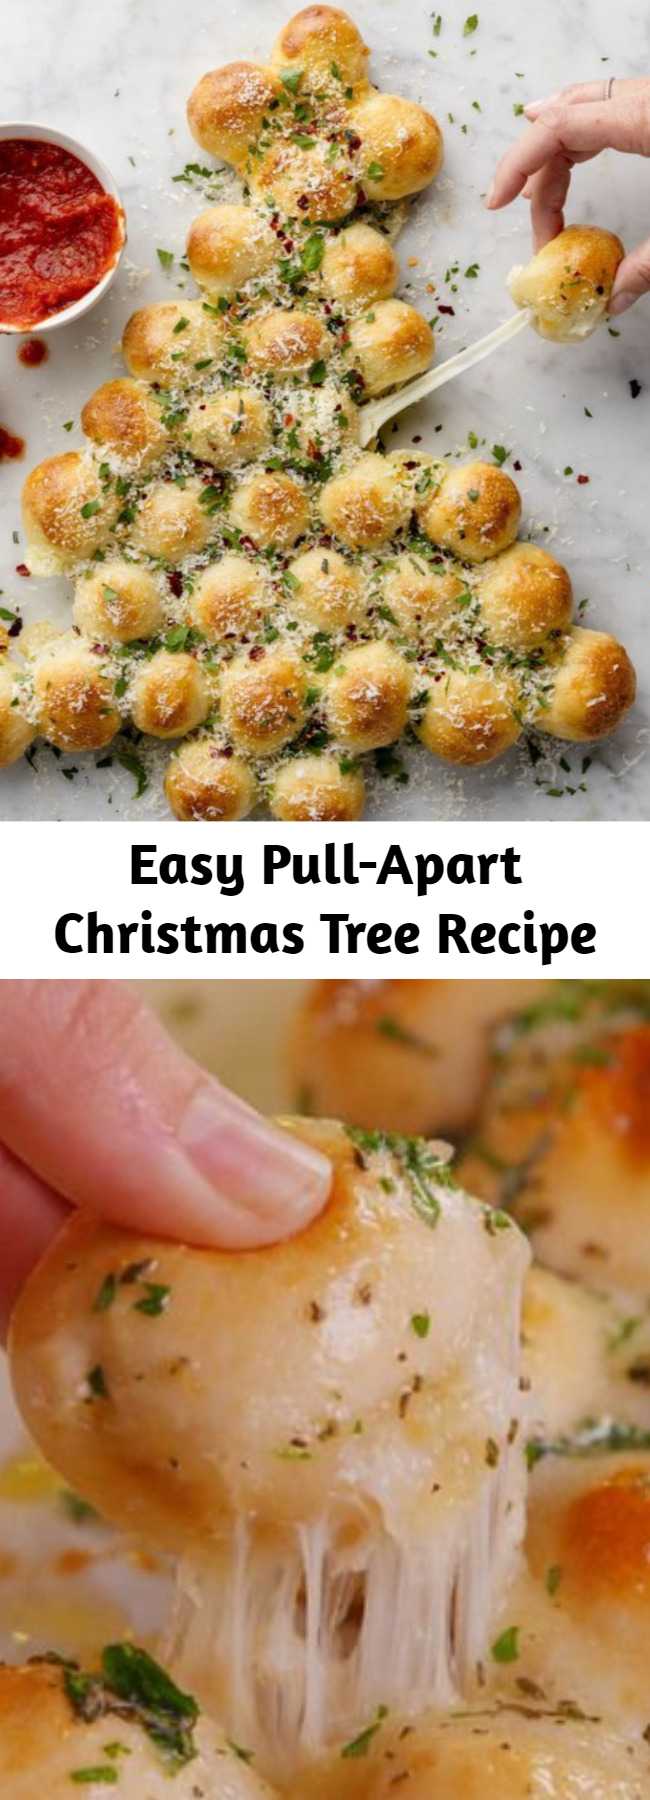 Easy Pull-Apart Christmas Tree Recipe - This cheesy Christmas tree is the app that gets demolished in seconds. #easy #cheesy #bread #appetizer #holiday #christmas #christmastree #cheese ##mozzarella #pizzadough #basil #herbs #fingerfoods